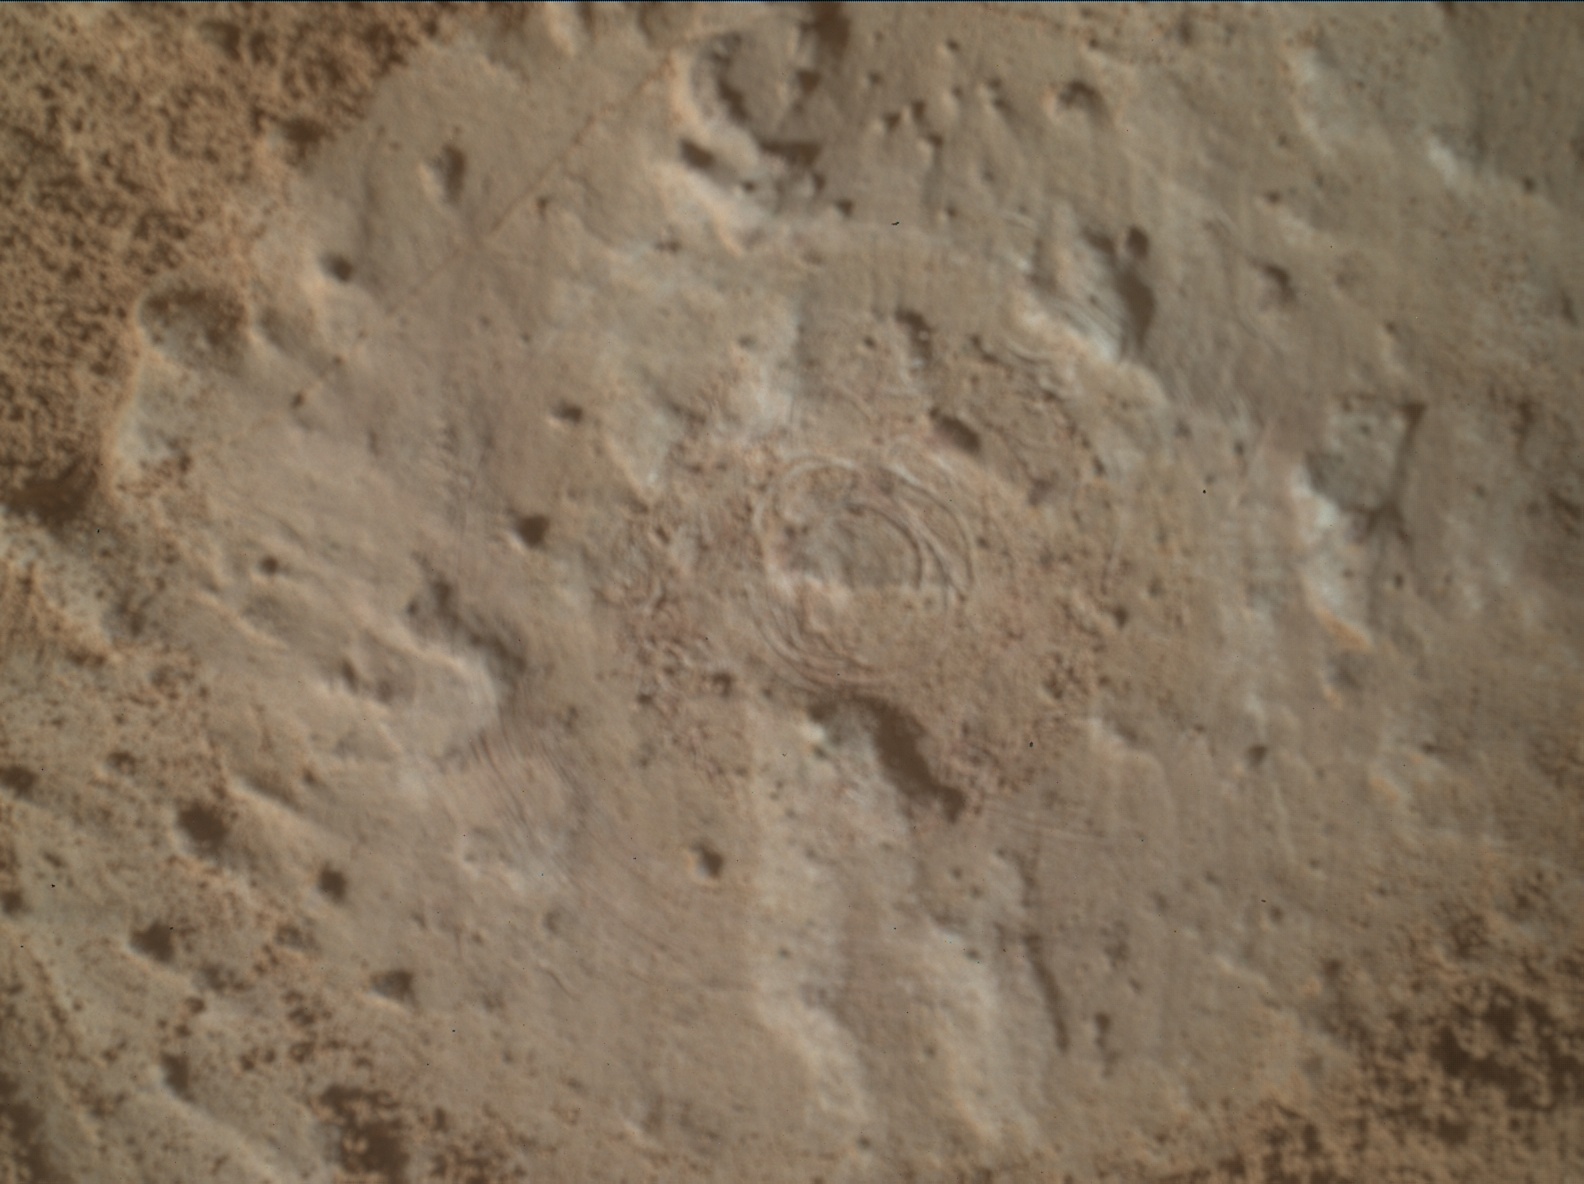 Nasa's Mars rover Curiosity acquired this image using its Mars Hand Lens Imager (MAHLI) on Sol 3085